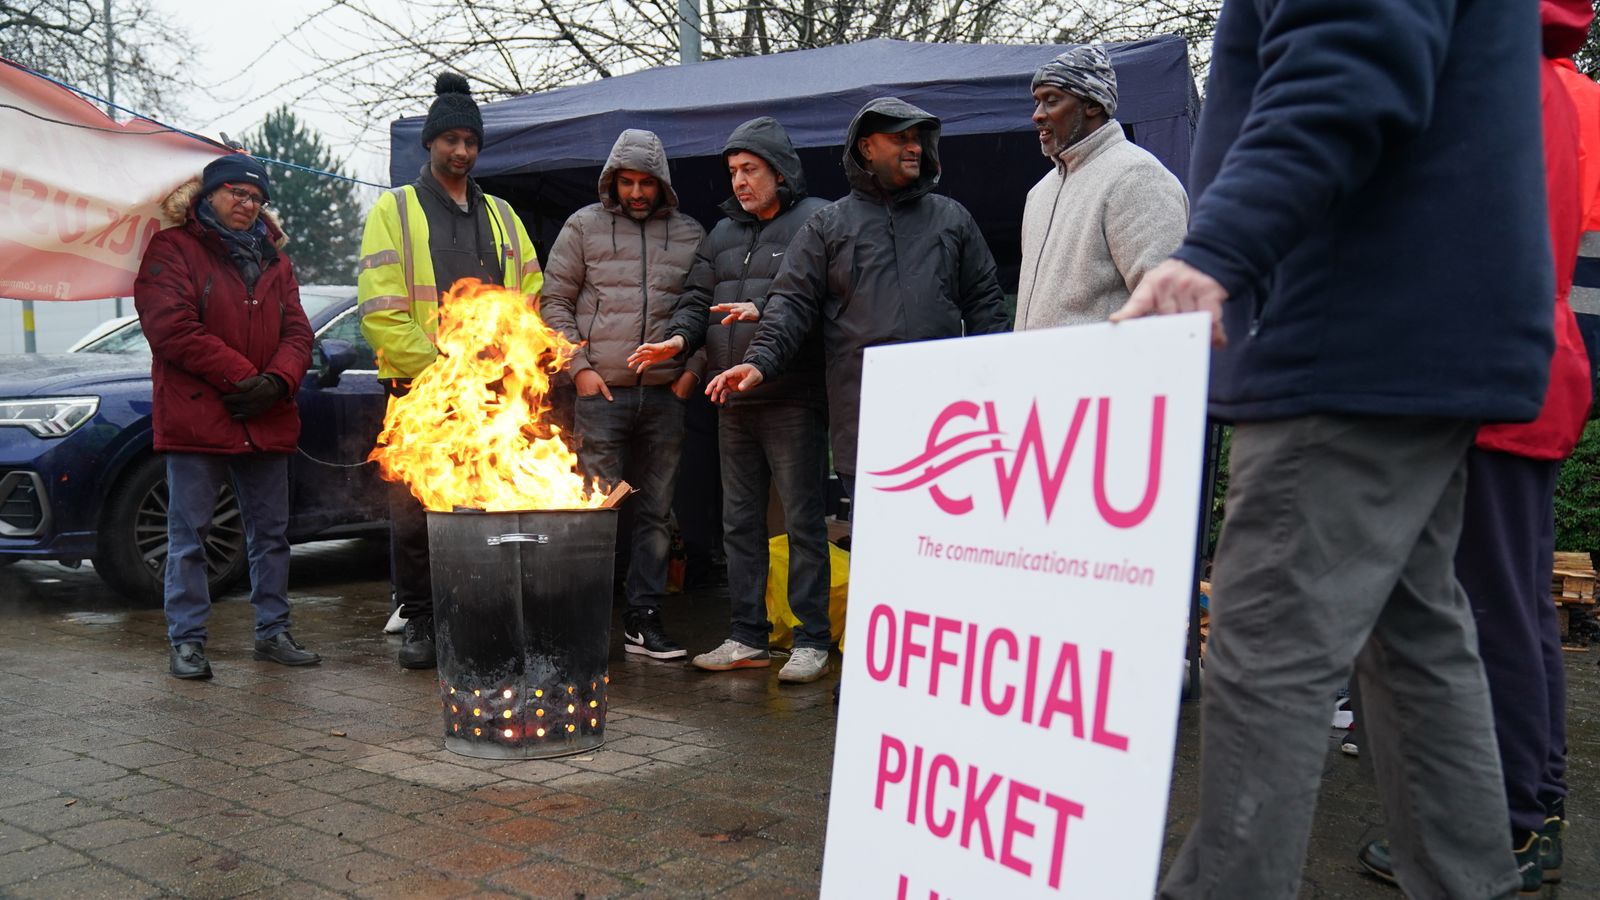 Royal Mail and Communication Workers Union reach agreement on pay and employment terms